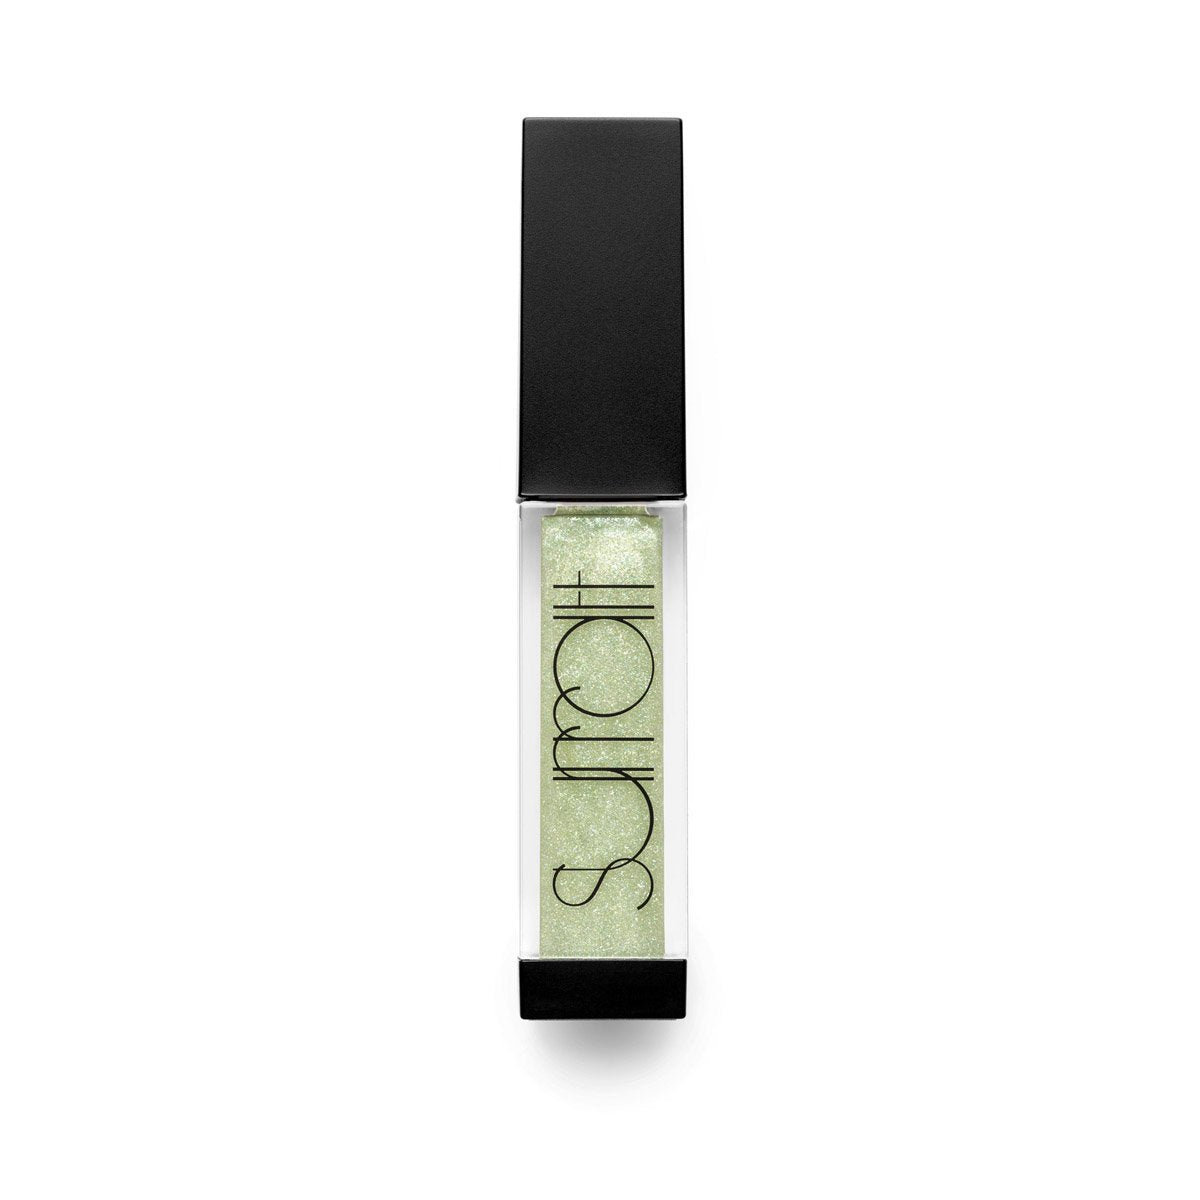 FAUX PAS - IRIDESCENT PALE GREEN WITH GOLD SHIMMER - high shine lip gloss in iridescent pale green shade with gold glitter